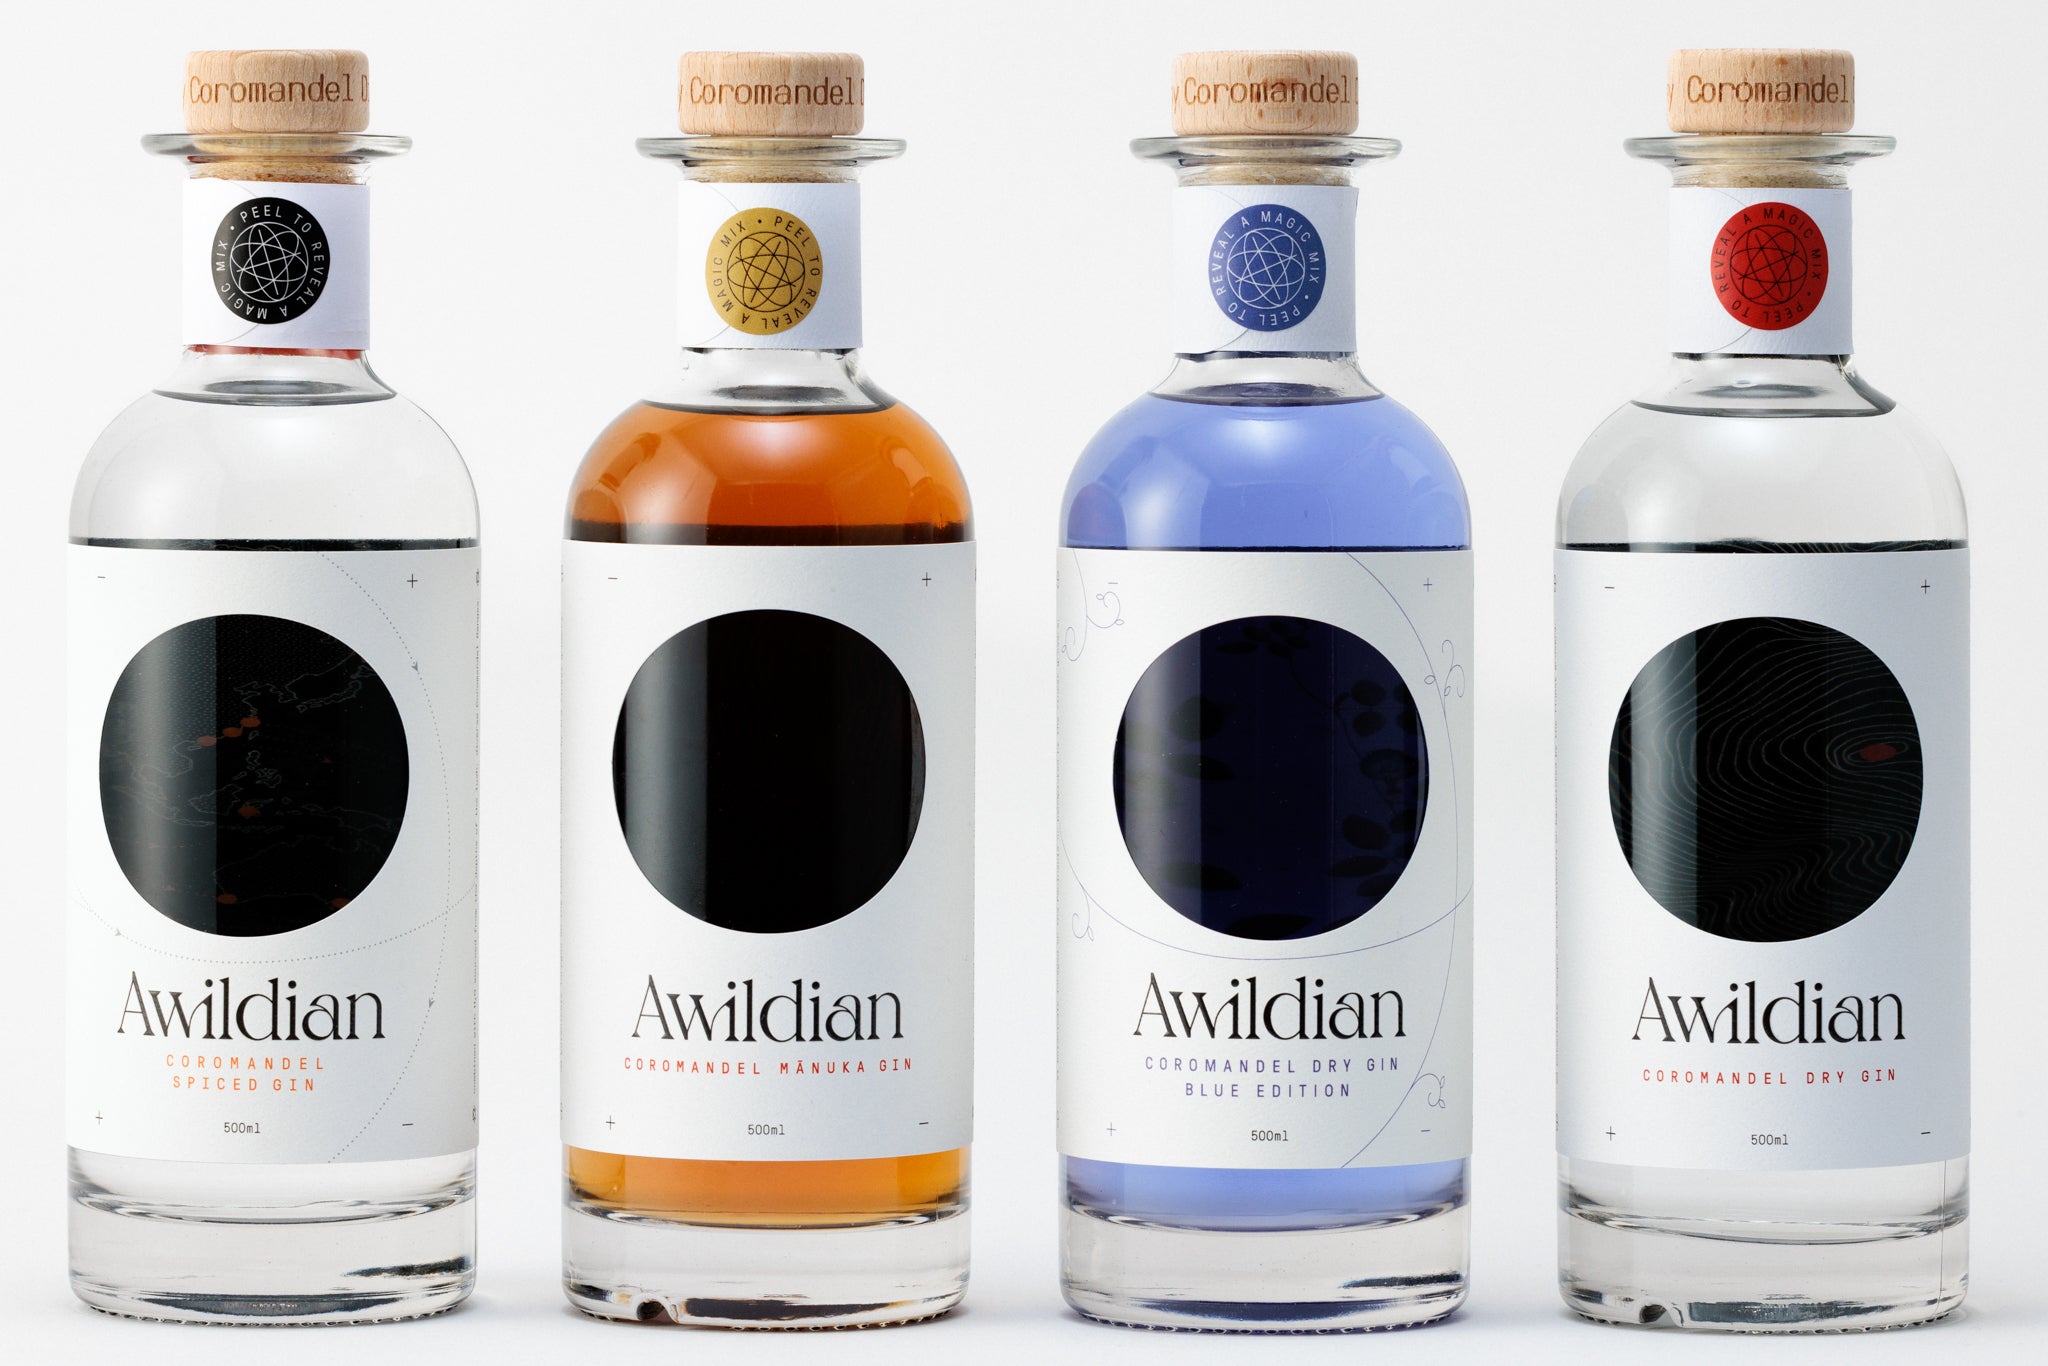 Save when you purchase multiple bottles of NZ-made Awildian Gin 